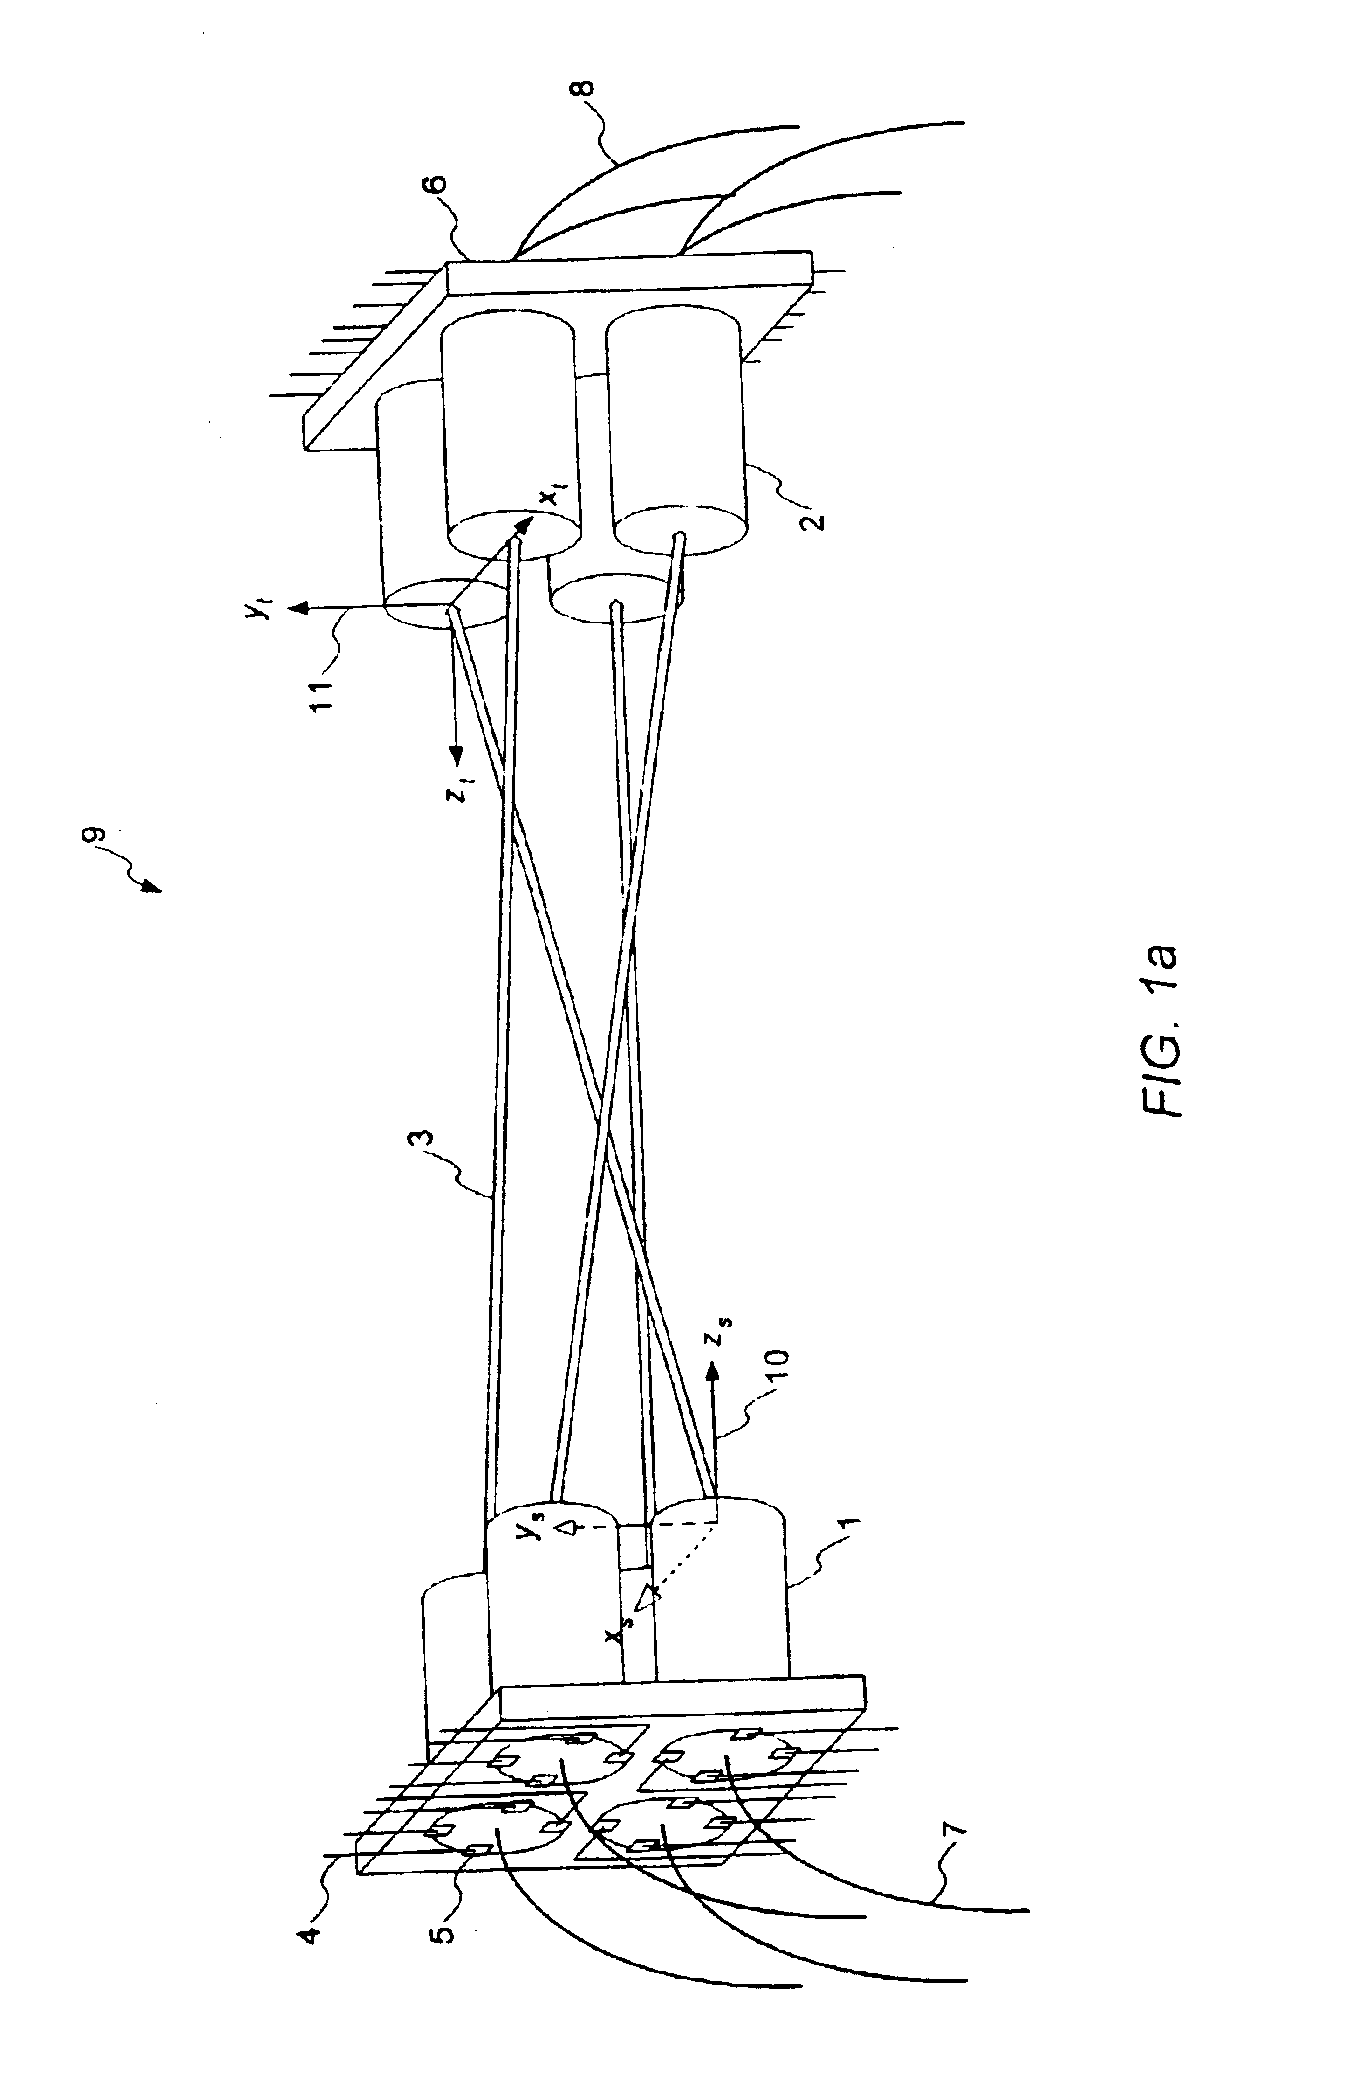 Multiple-axis control system for an optical switch